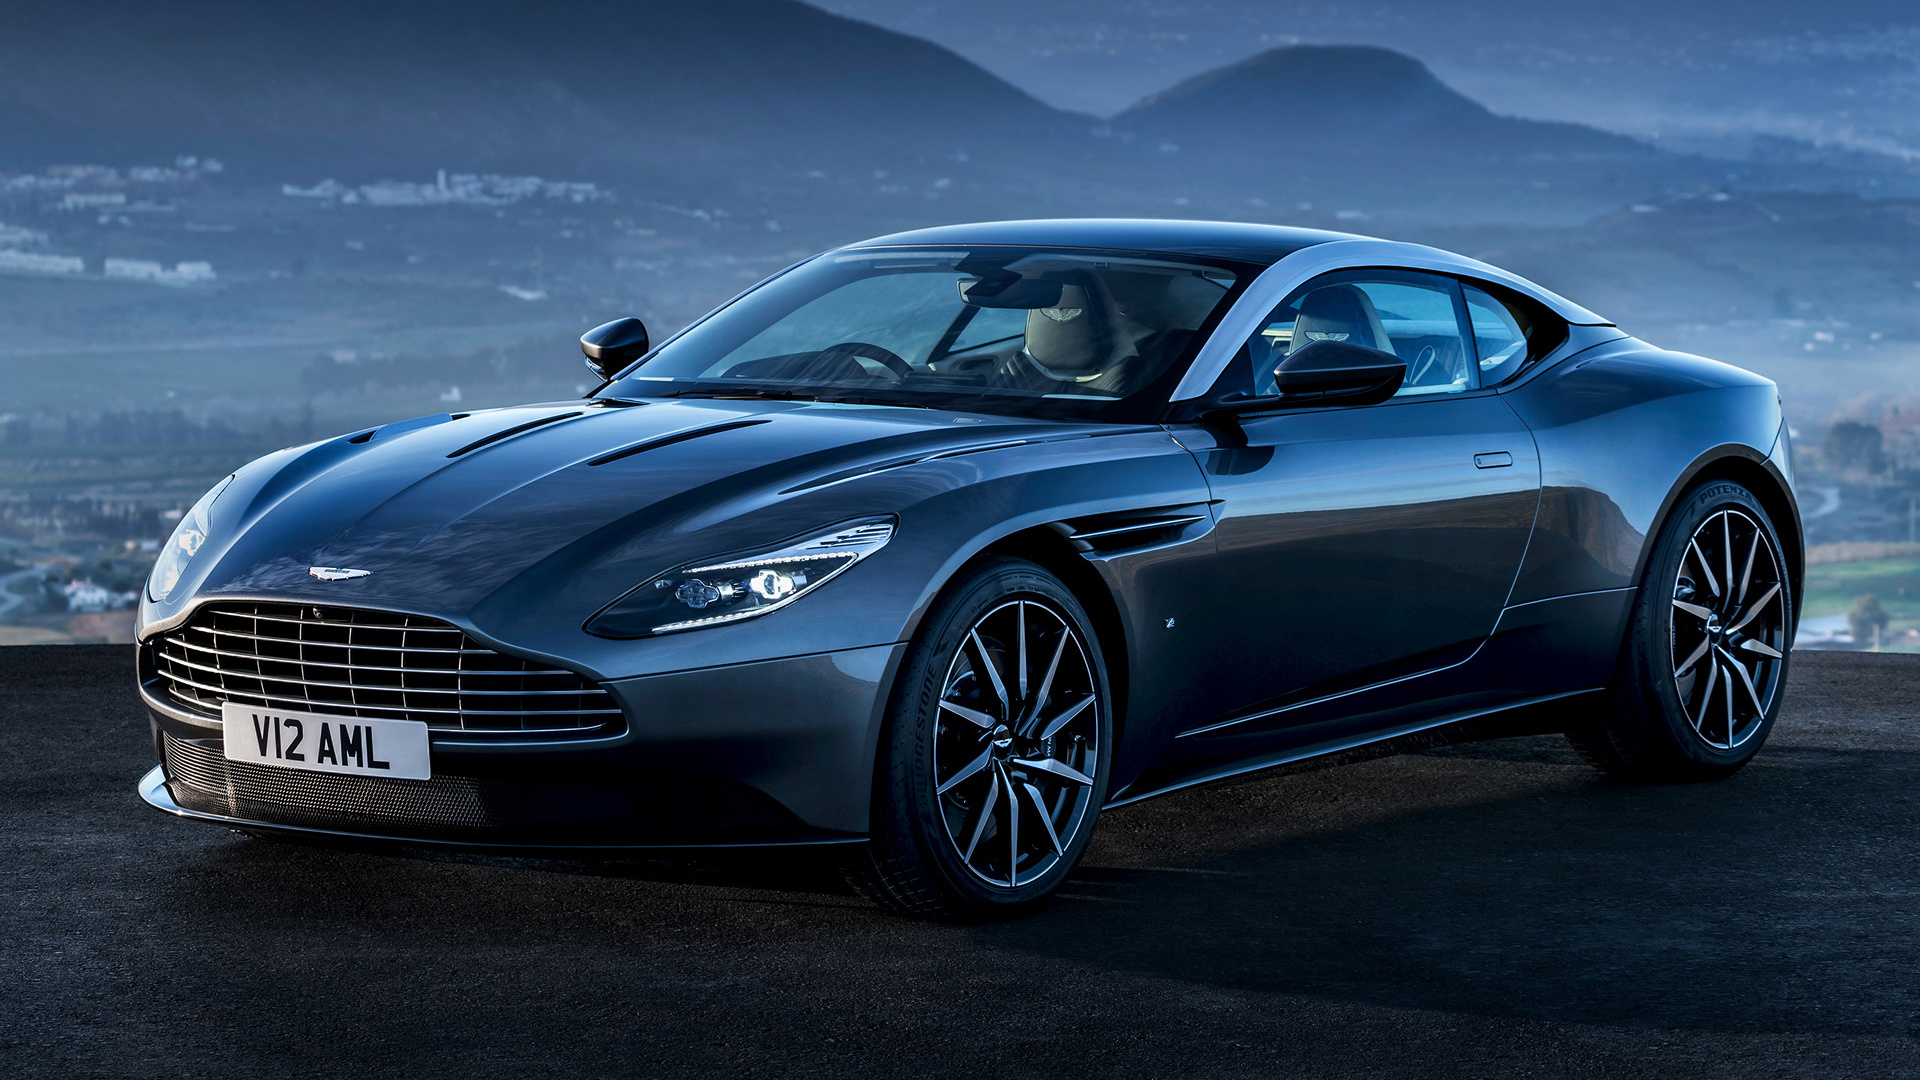 2021 Aston Martin DB11  UK Wallpapers  and HD Images 